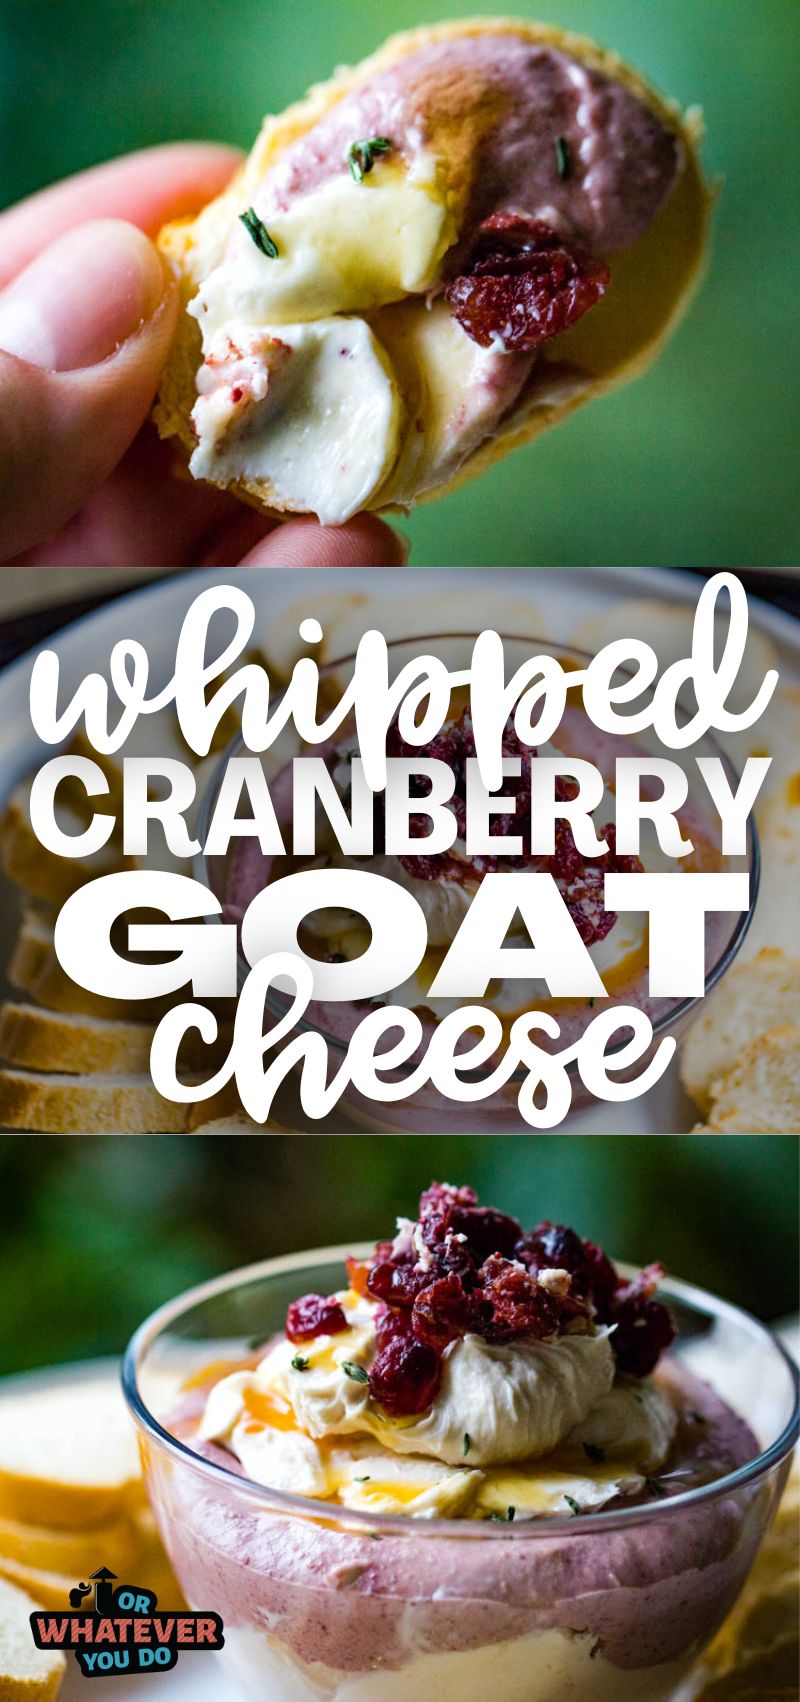 Whipped Cranberry Goat Cheese - Easy holiday appetizer recipe